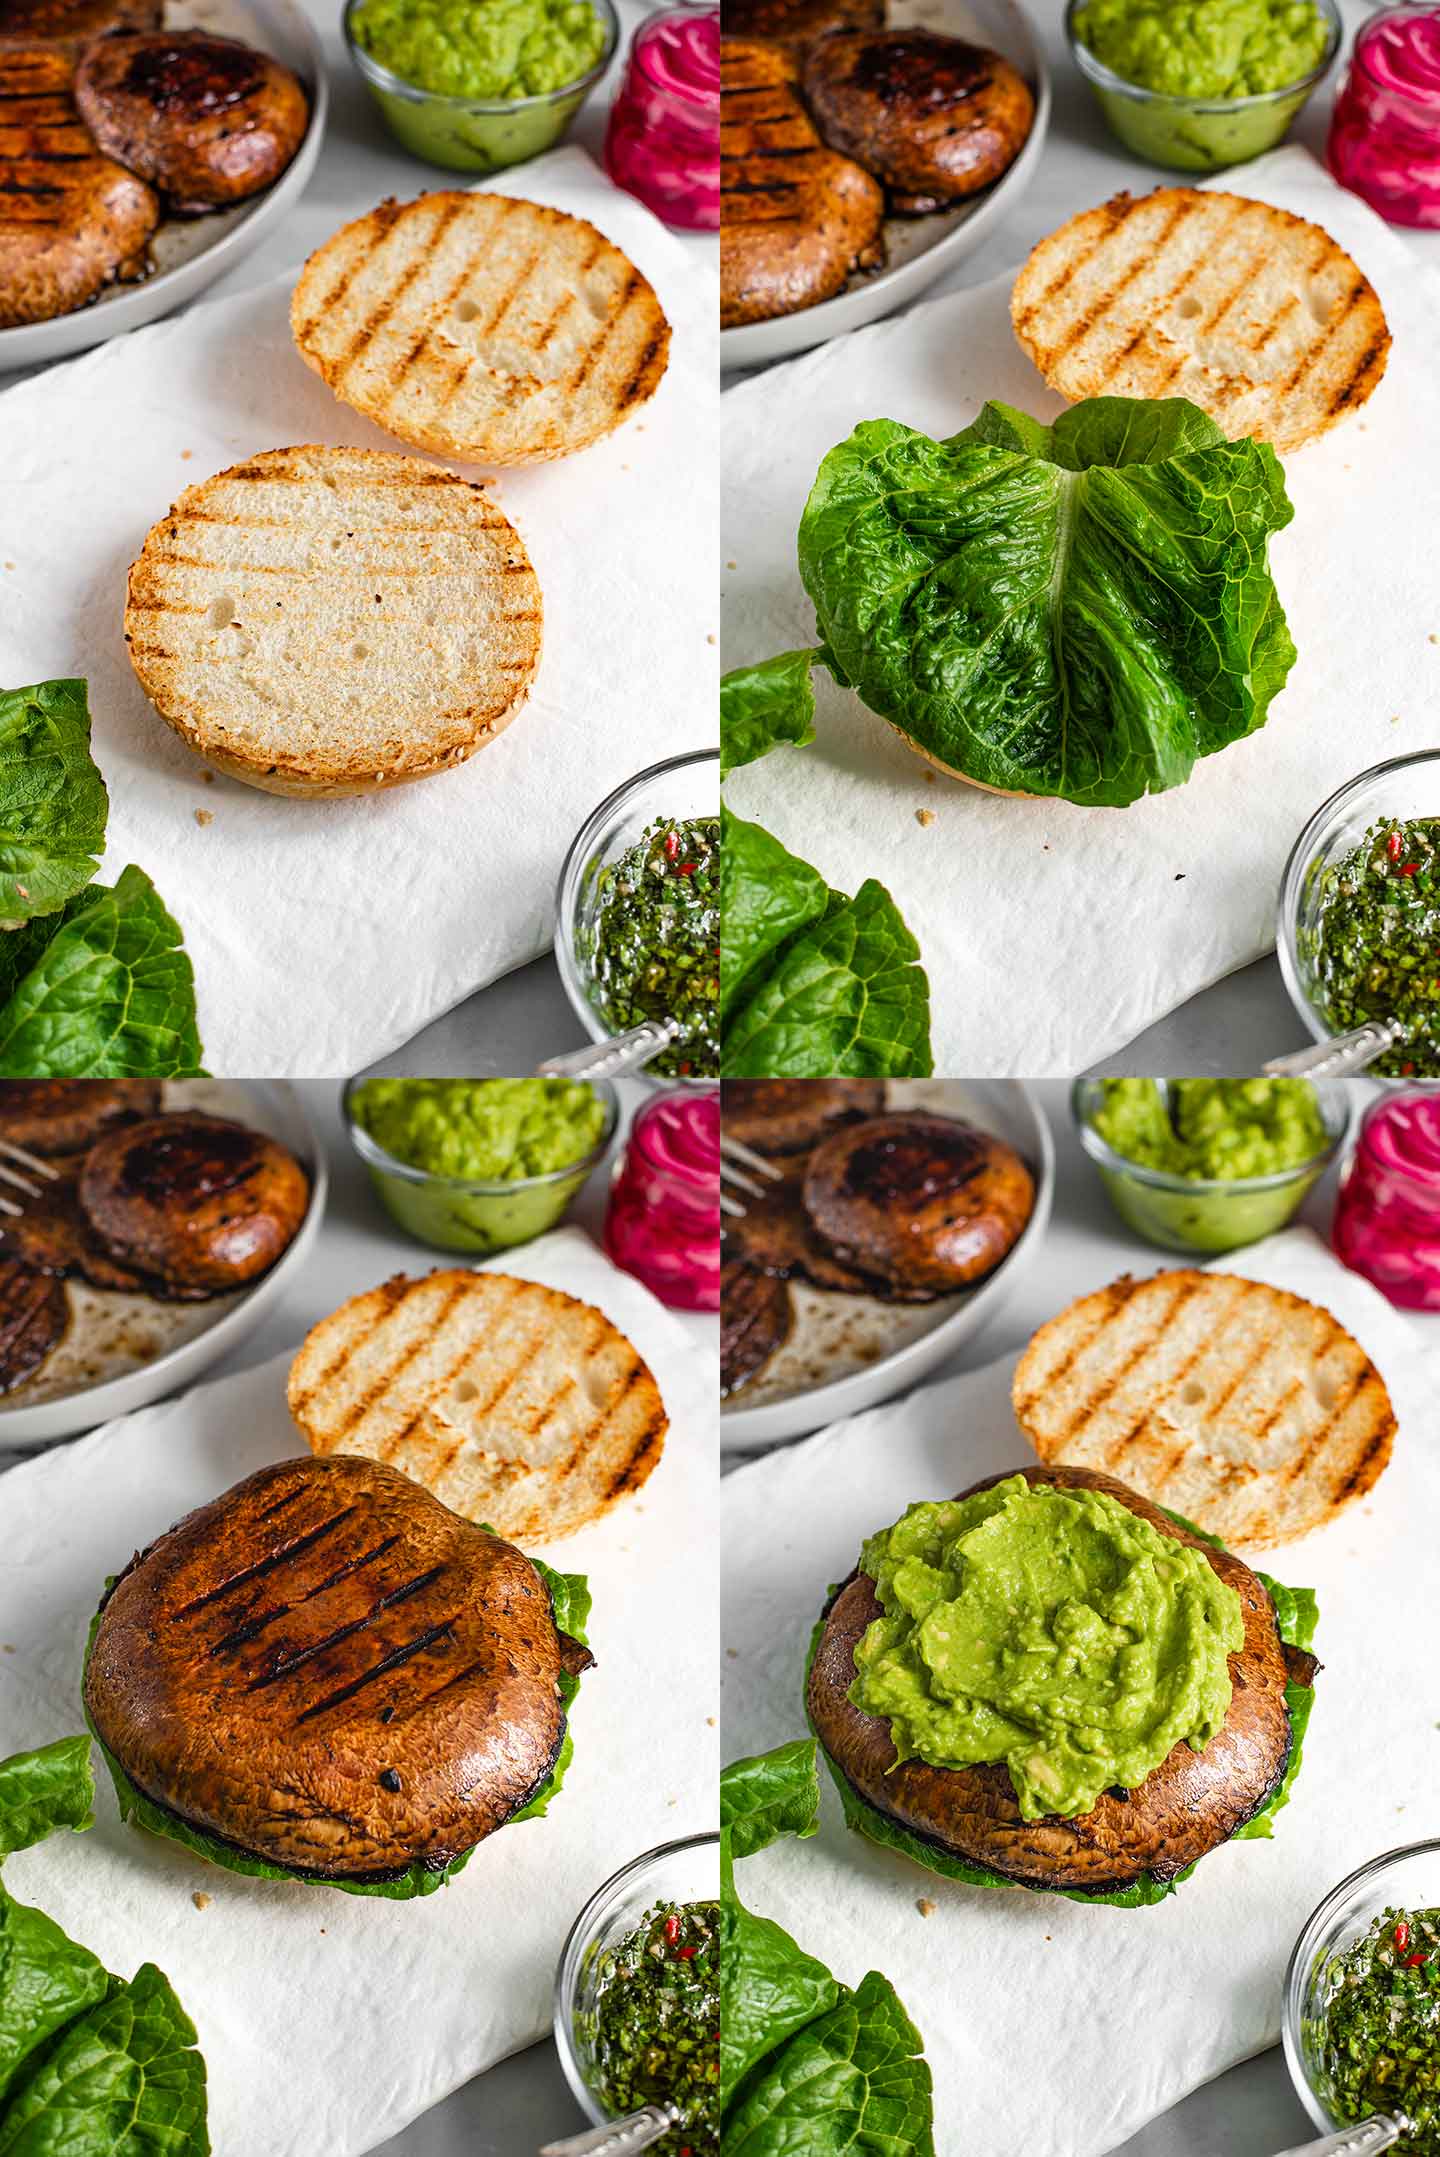 A grid of four process photos. A grilled burger bun lays on a white tray with ingredients around. Lettuce lays on the bottom bun. A mushroom patty is placed on top. Then mashed avocado is added.